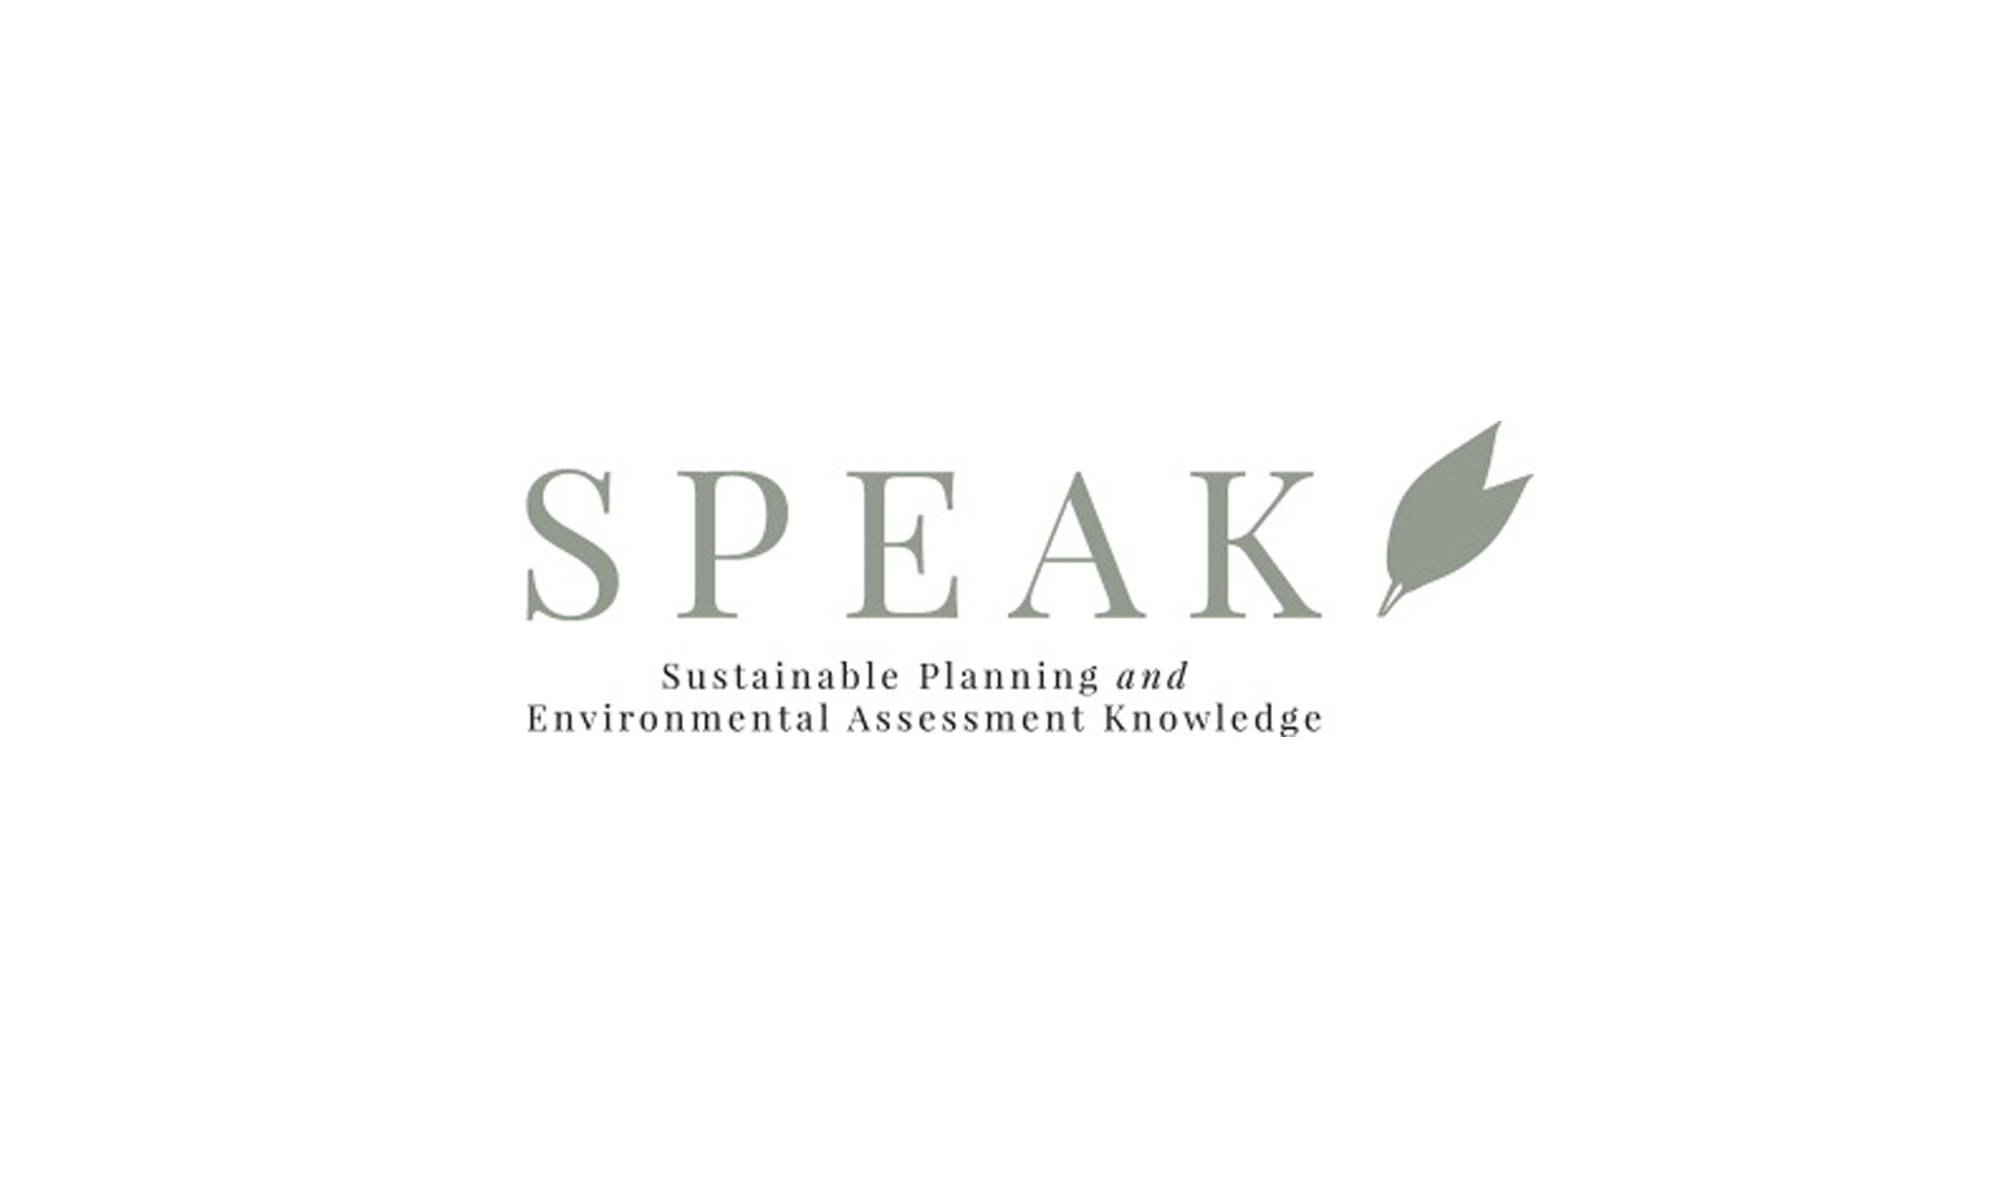 Sustainable Planning and Environmental Assessment Knowledge